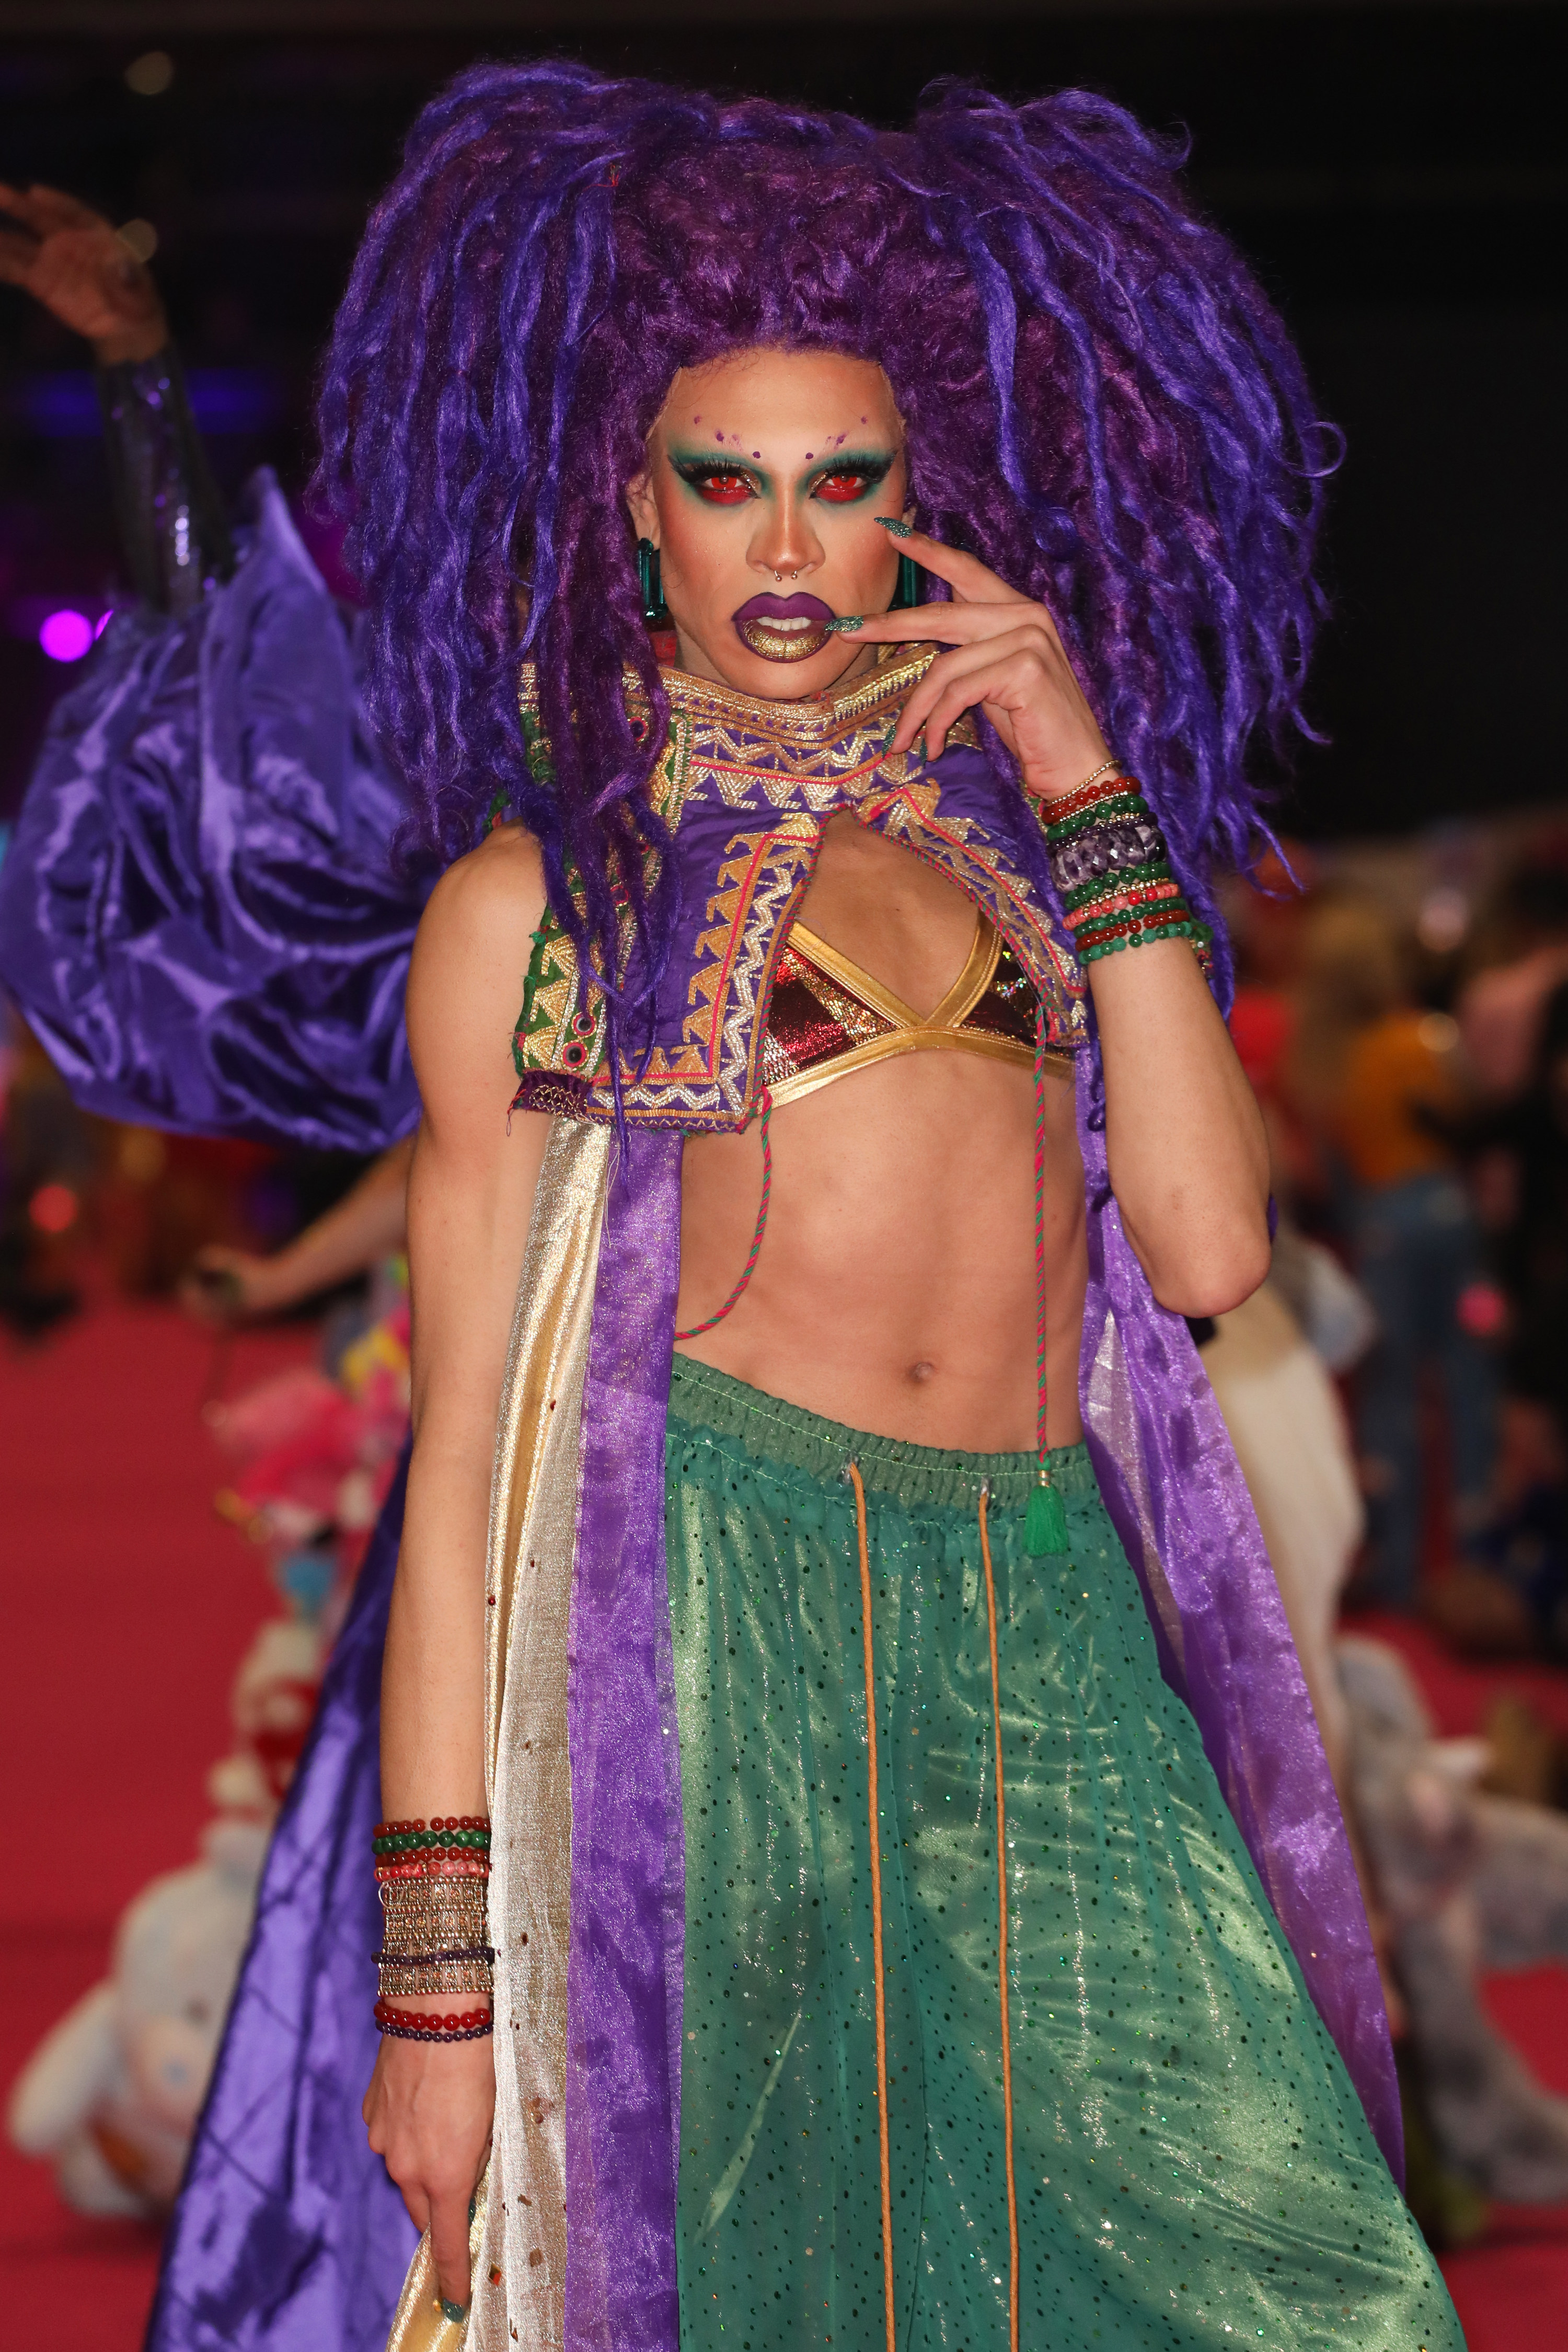 yvie oddly poses for a photo in a bikini top and pants